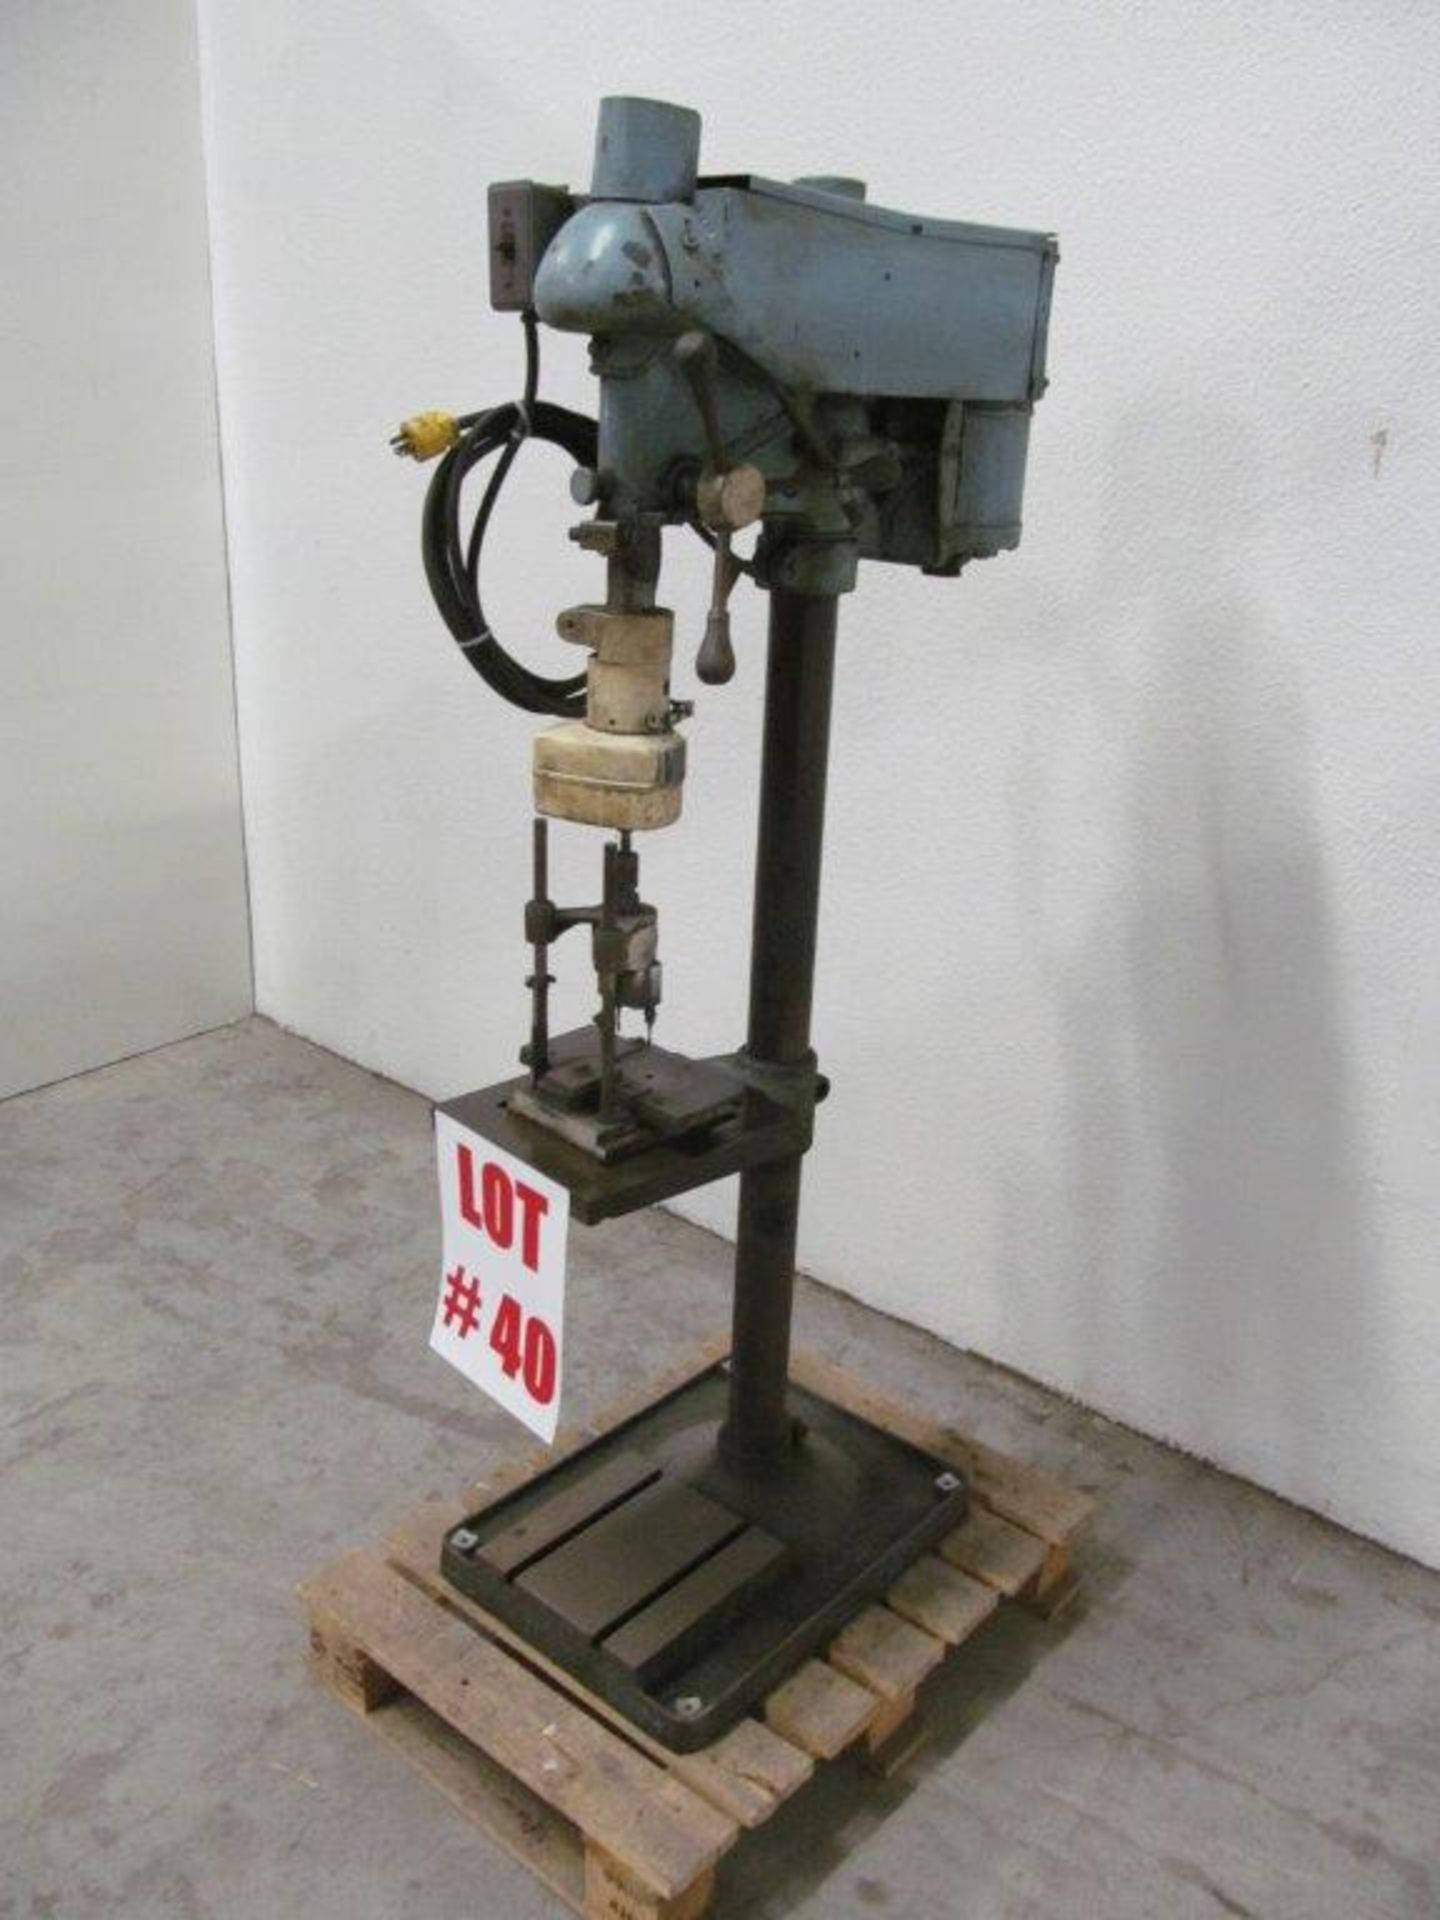 CANADIAN PEDESTAL DRILL PRESS C/W TAPPING HEAD, ELECTRICS: 115V/1PH/60C - Image 2 of 2